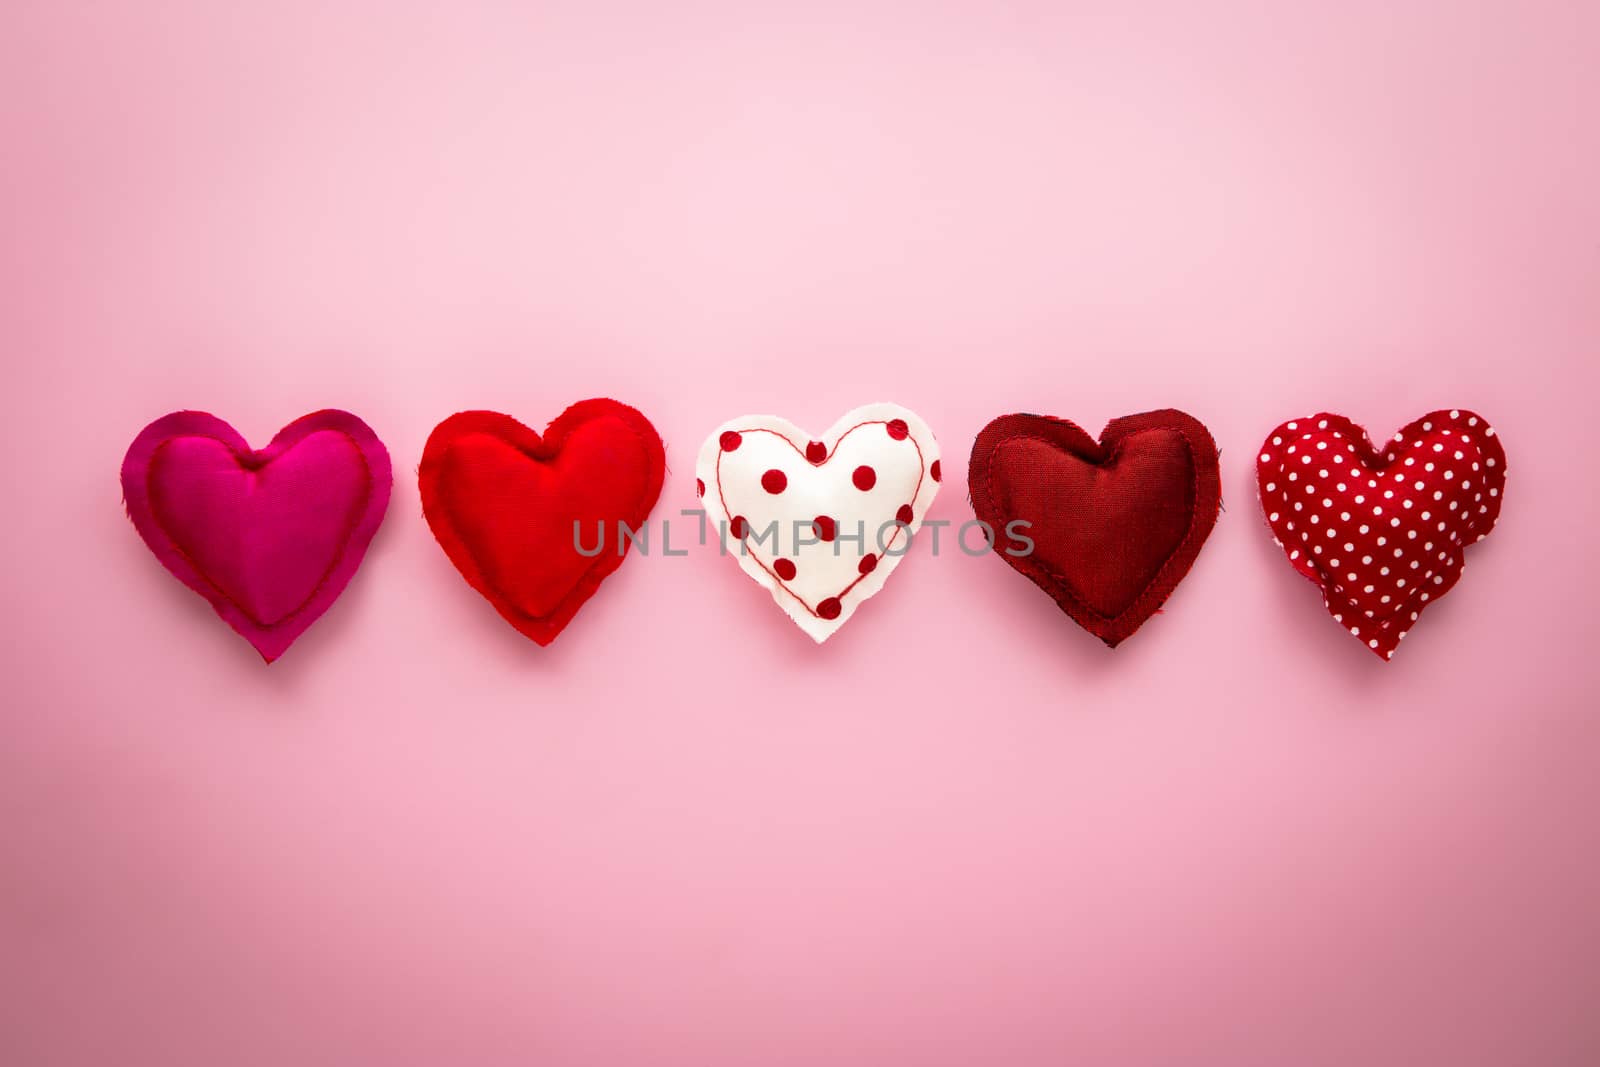 Group of sweet hearts handmade crafts from red tone silk and cotton cloths place on pink paper background with vignette, love and valentine's day symbol